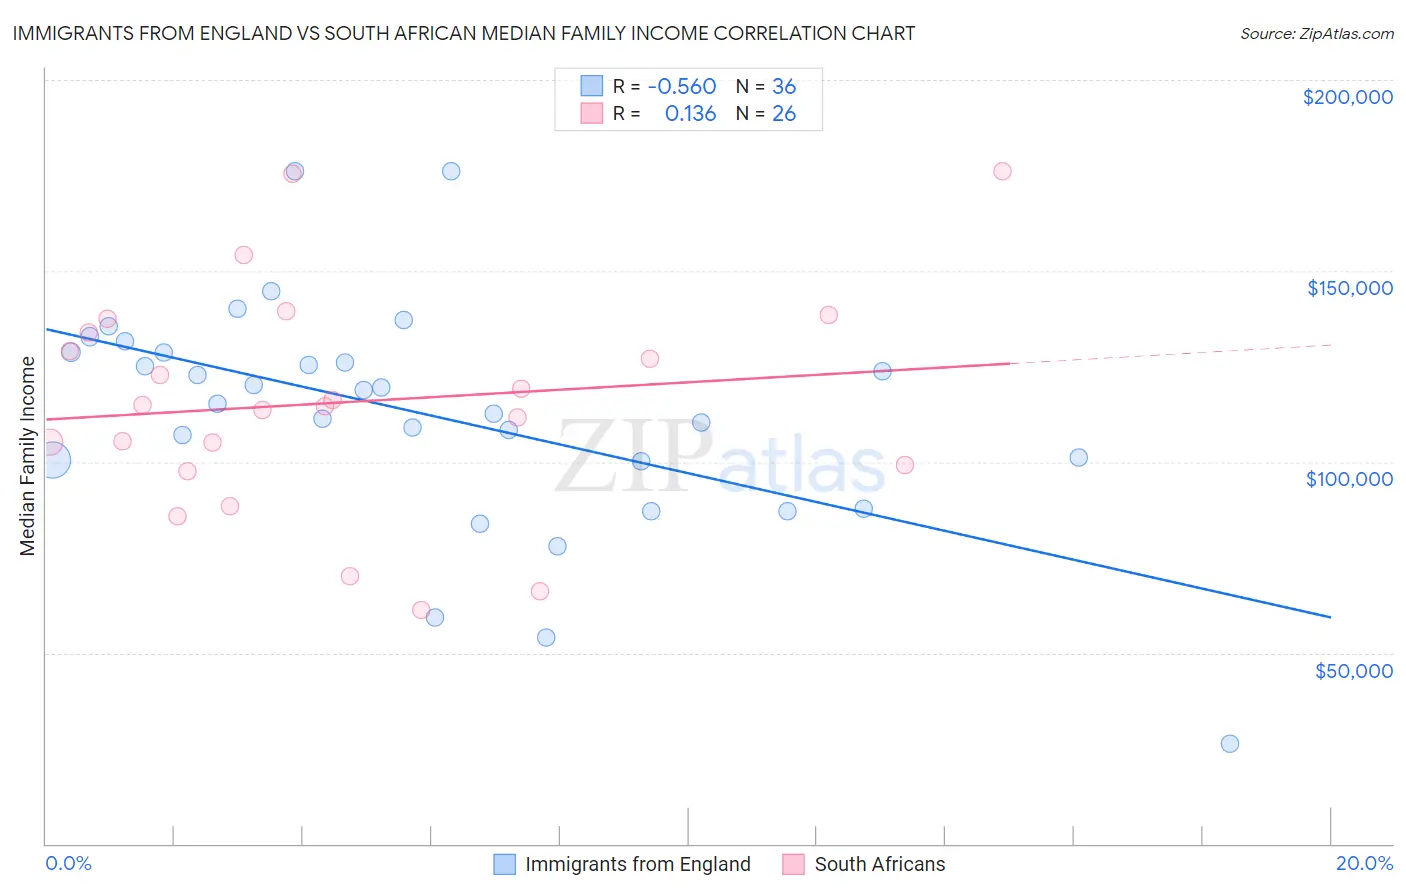 Immigrants from England vs South African Median Family Income